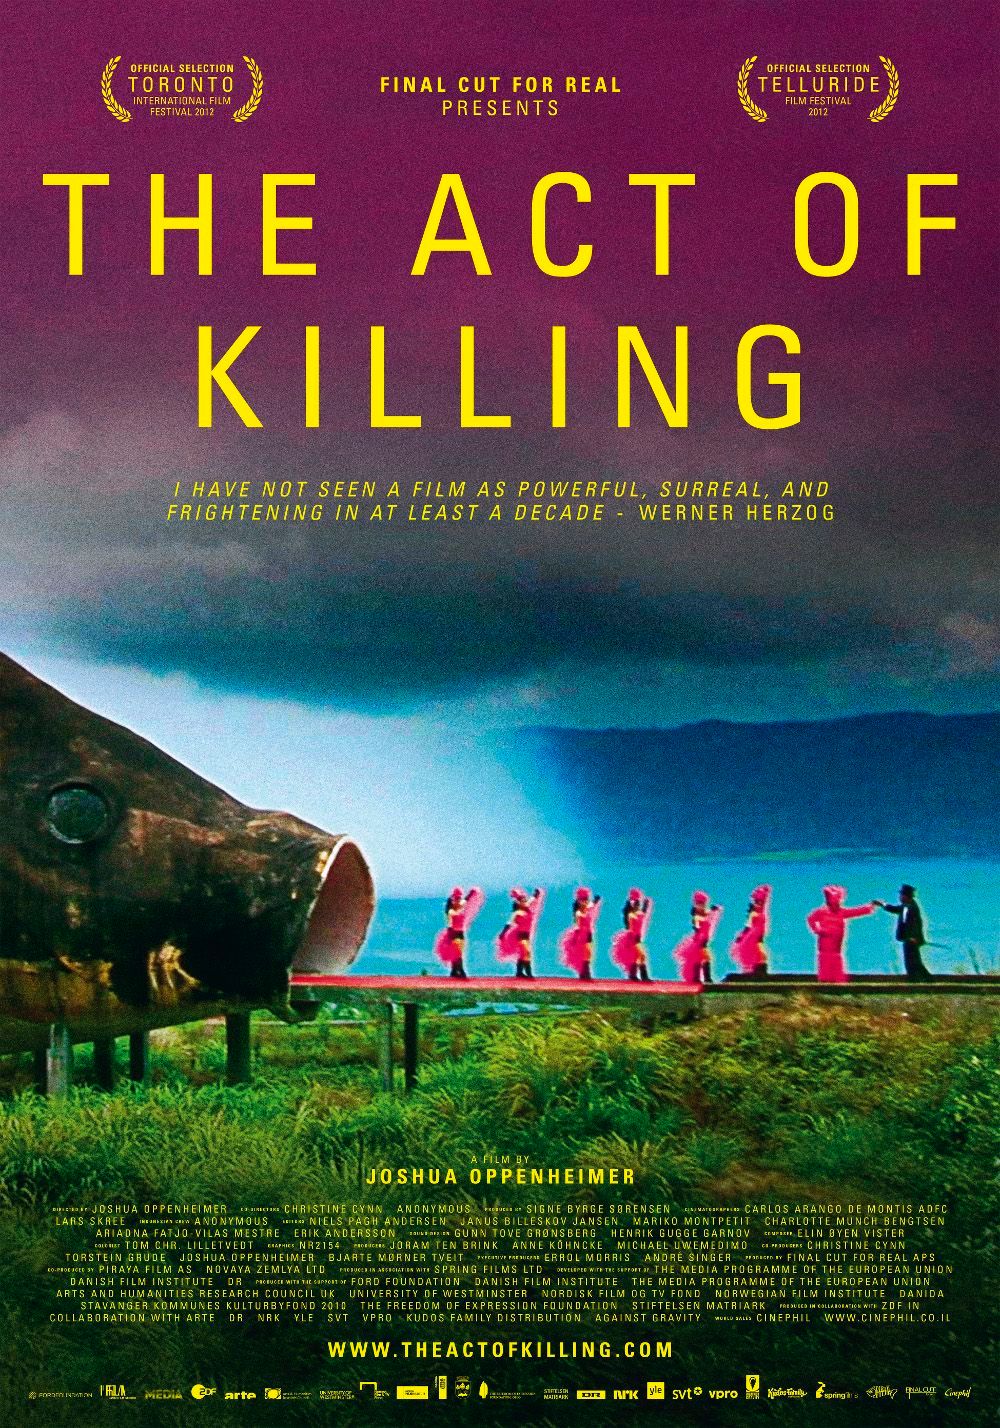 Joshua Oppenheimer and The Act of Killing